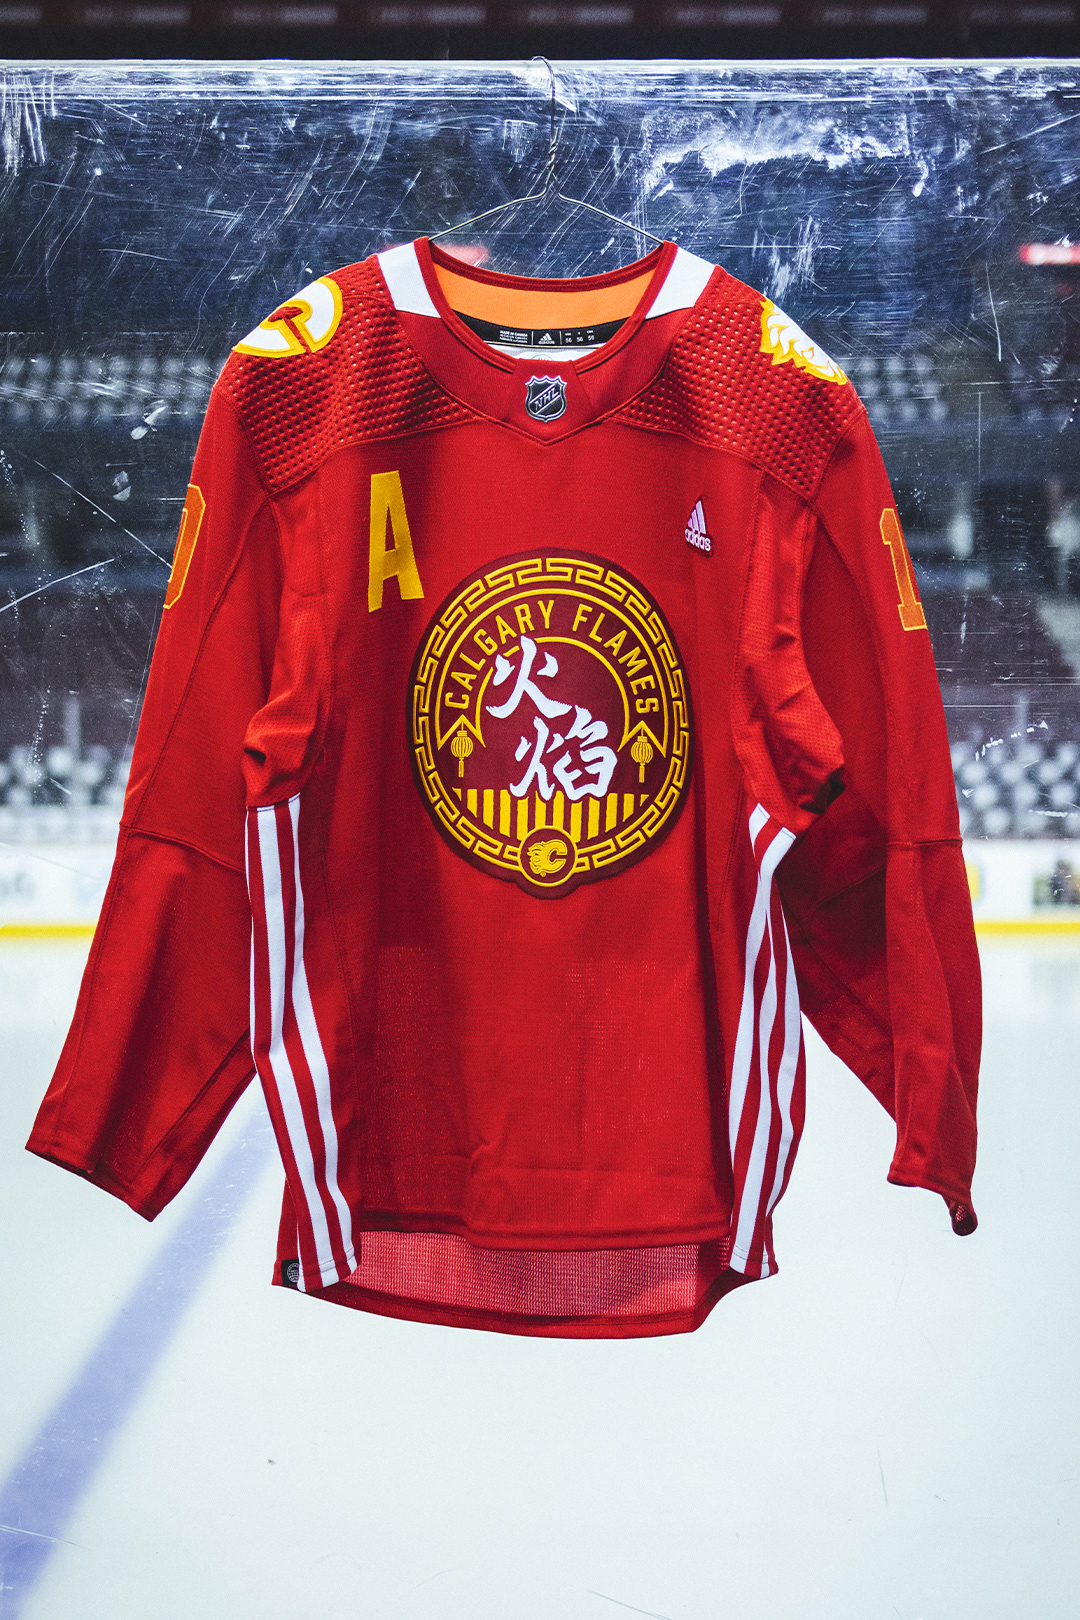 Flames TV Chinese  Lunar New Year Jersey Design 